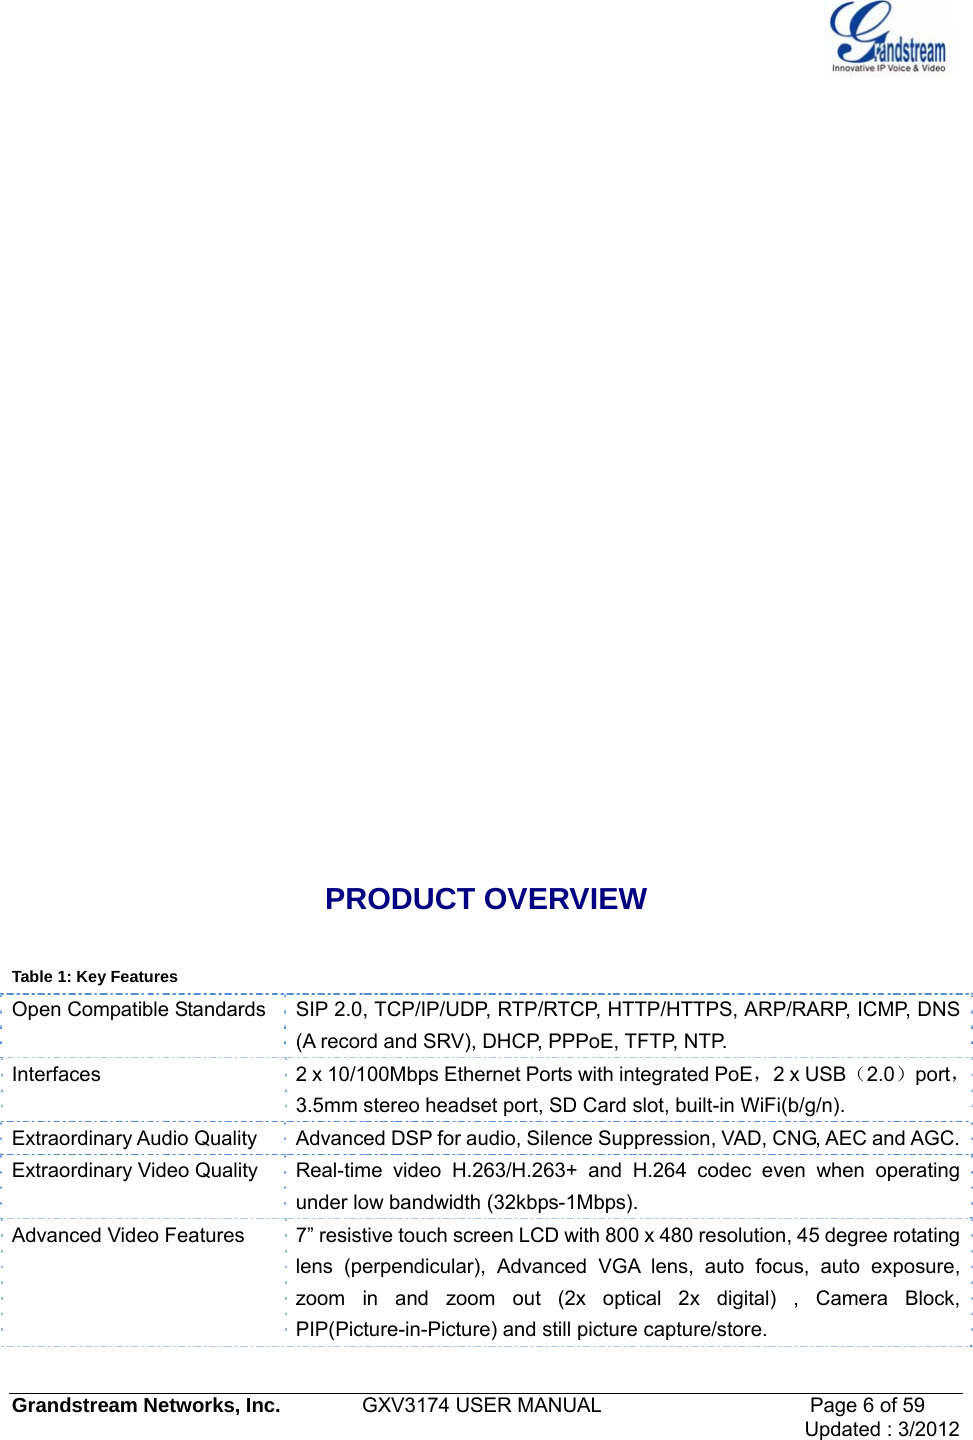   Grandstream Networks, Inc.        GXV3174 USER MANUAL                     Page 6 of 59                                 Updated : 3/2012               PRODUCT OVERVIEW  Table 1: Key Features Open Compatible Standards  SIP 2.0, TCP/IP/UDP, RTP/RTCP, HTTP/HTTPS, ARP/RARP, ICMP, DNS (A record and SRV), DHCP, PPPoE, TFTP, NTP. Interfaces  2 x 10/100Mbps Ethernet Ports with integrated PoE，2 x USB（2.0）port，3.5mm stereo headset port, SD Card slot, built-in WiFi(b/g/n). Extraordinary Audio Quality  Advanced DSP for audio, Silence Suppression, VAD, CNG, AEC and AGC.Extraordinary Video Quality  Real-time video H.263/H.263+ and H.264 codec even when operating under low bandwidth (32kbps-1Mbps). Advanced Video Features  7” resistive touch screen LCD with 800 x 480 resolution, 45 degree rotating lens (perpendicular), Advanced VGA lens, auto focus, auto exposure, zoom in and zoom out (2x optical 2x digital) , Camera Block, PIP(Picture-in-Picture) and still picture capture/store. 